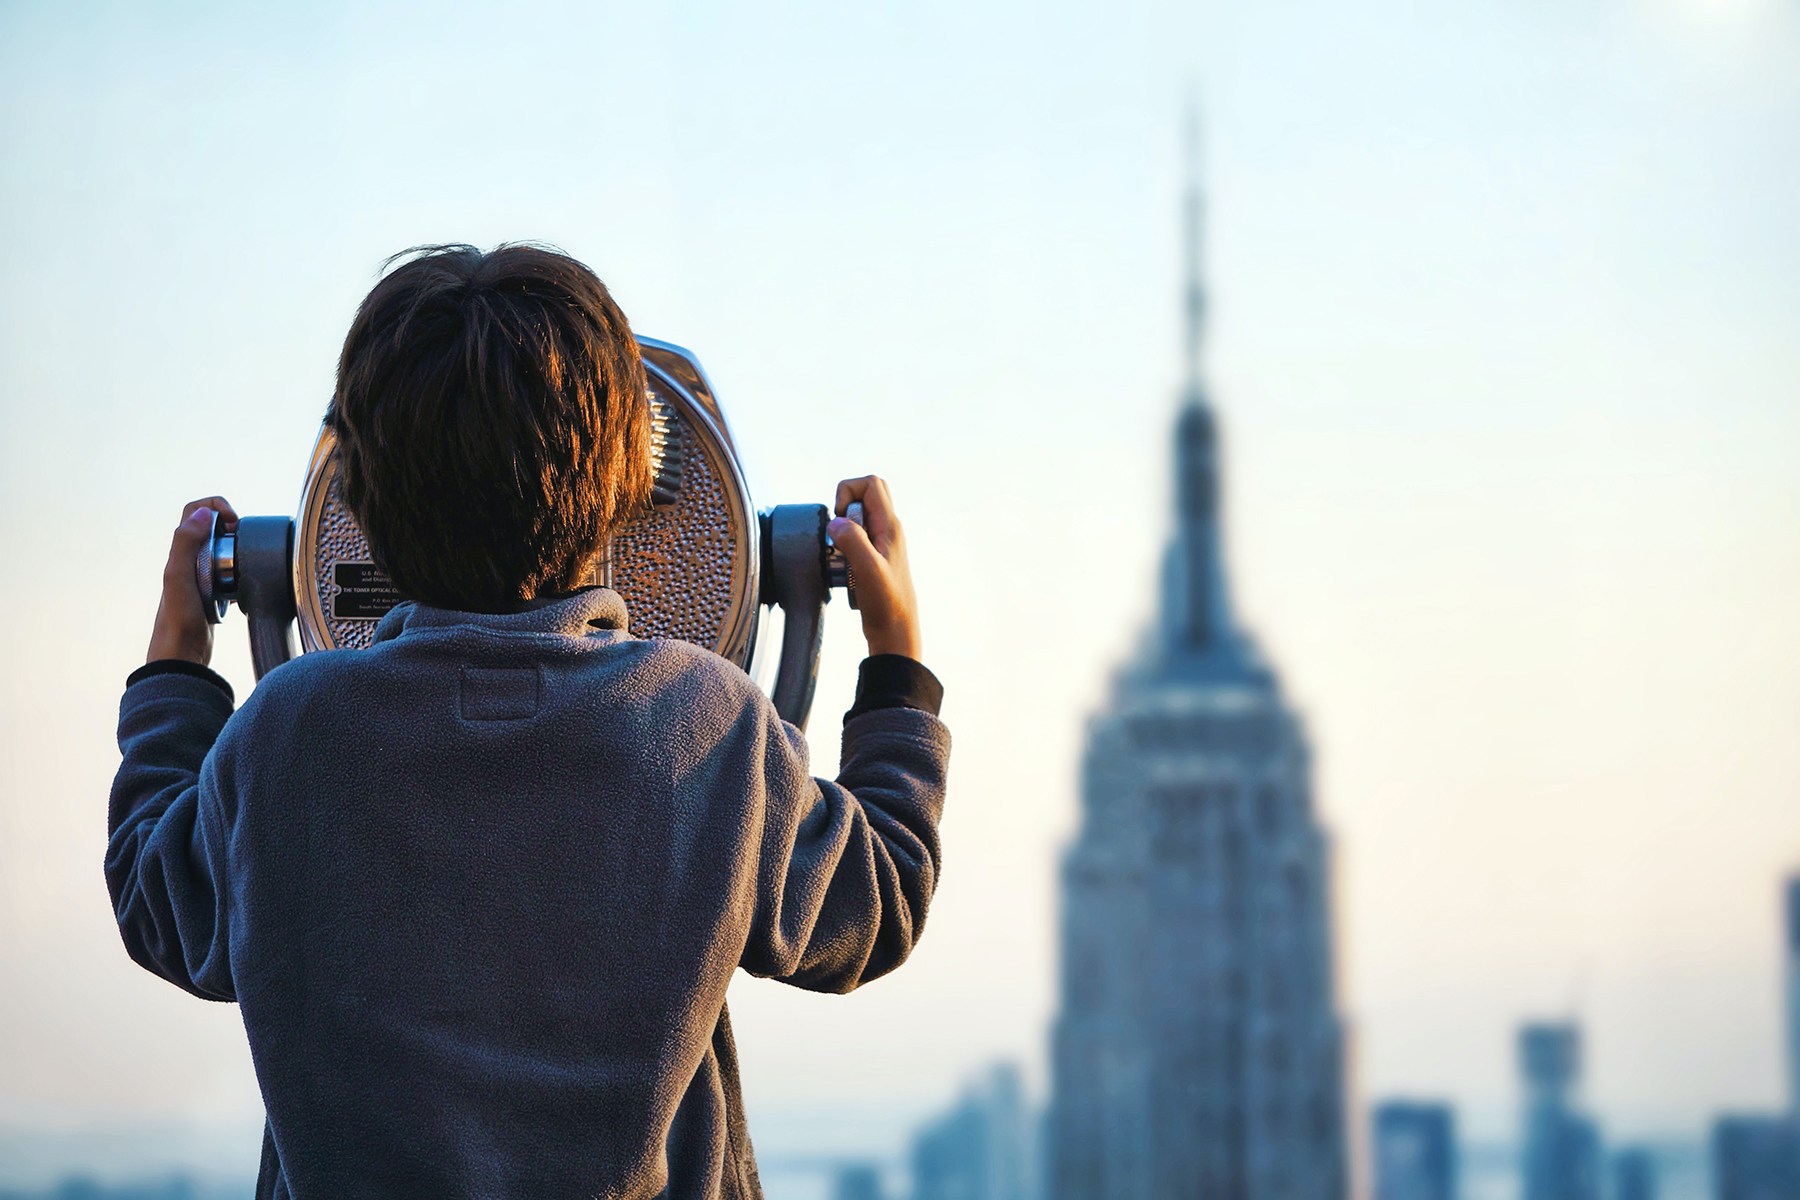 A photo of a young boy looking through a large binocular at the Empire State building in New York